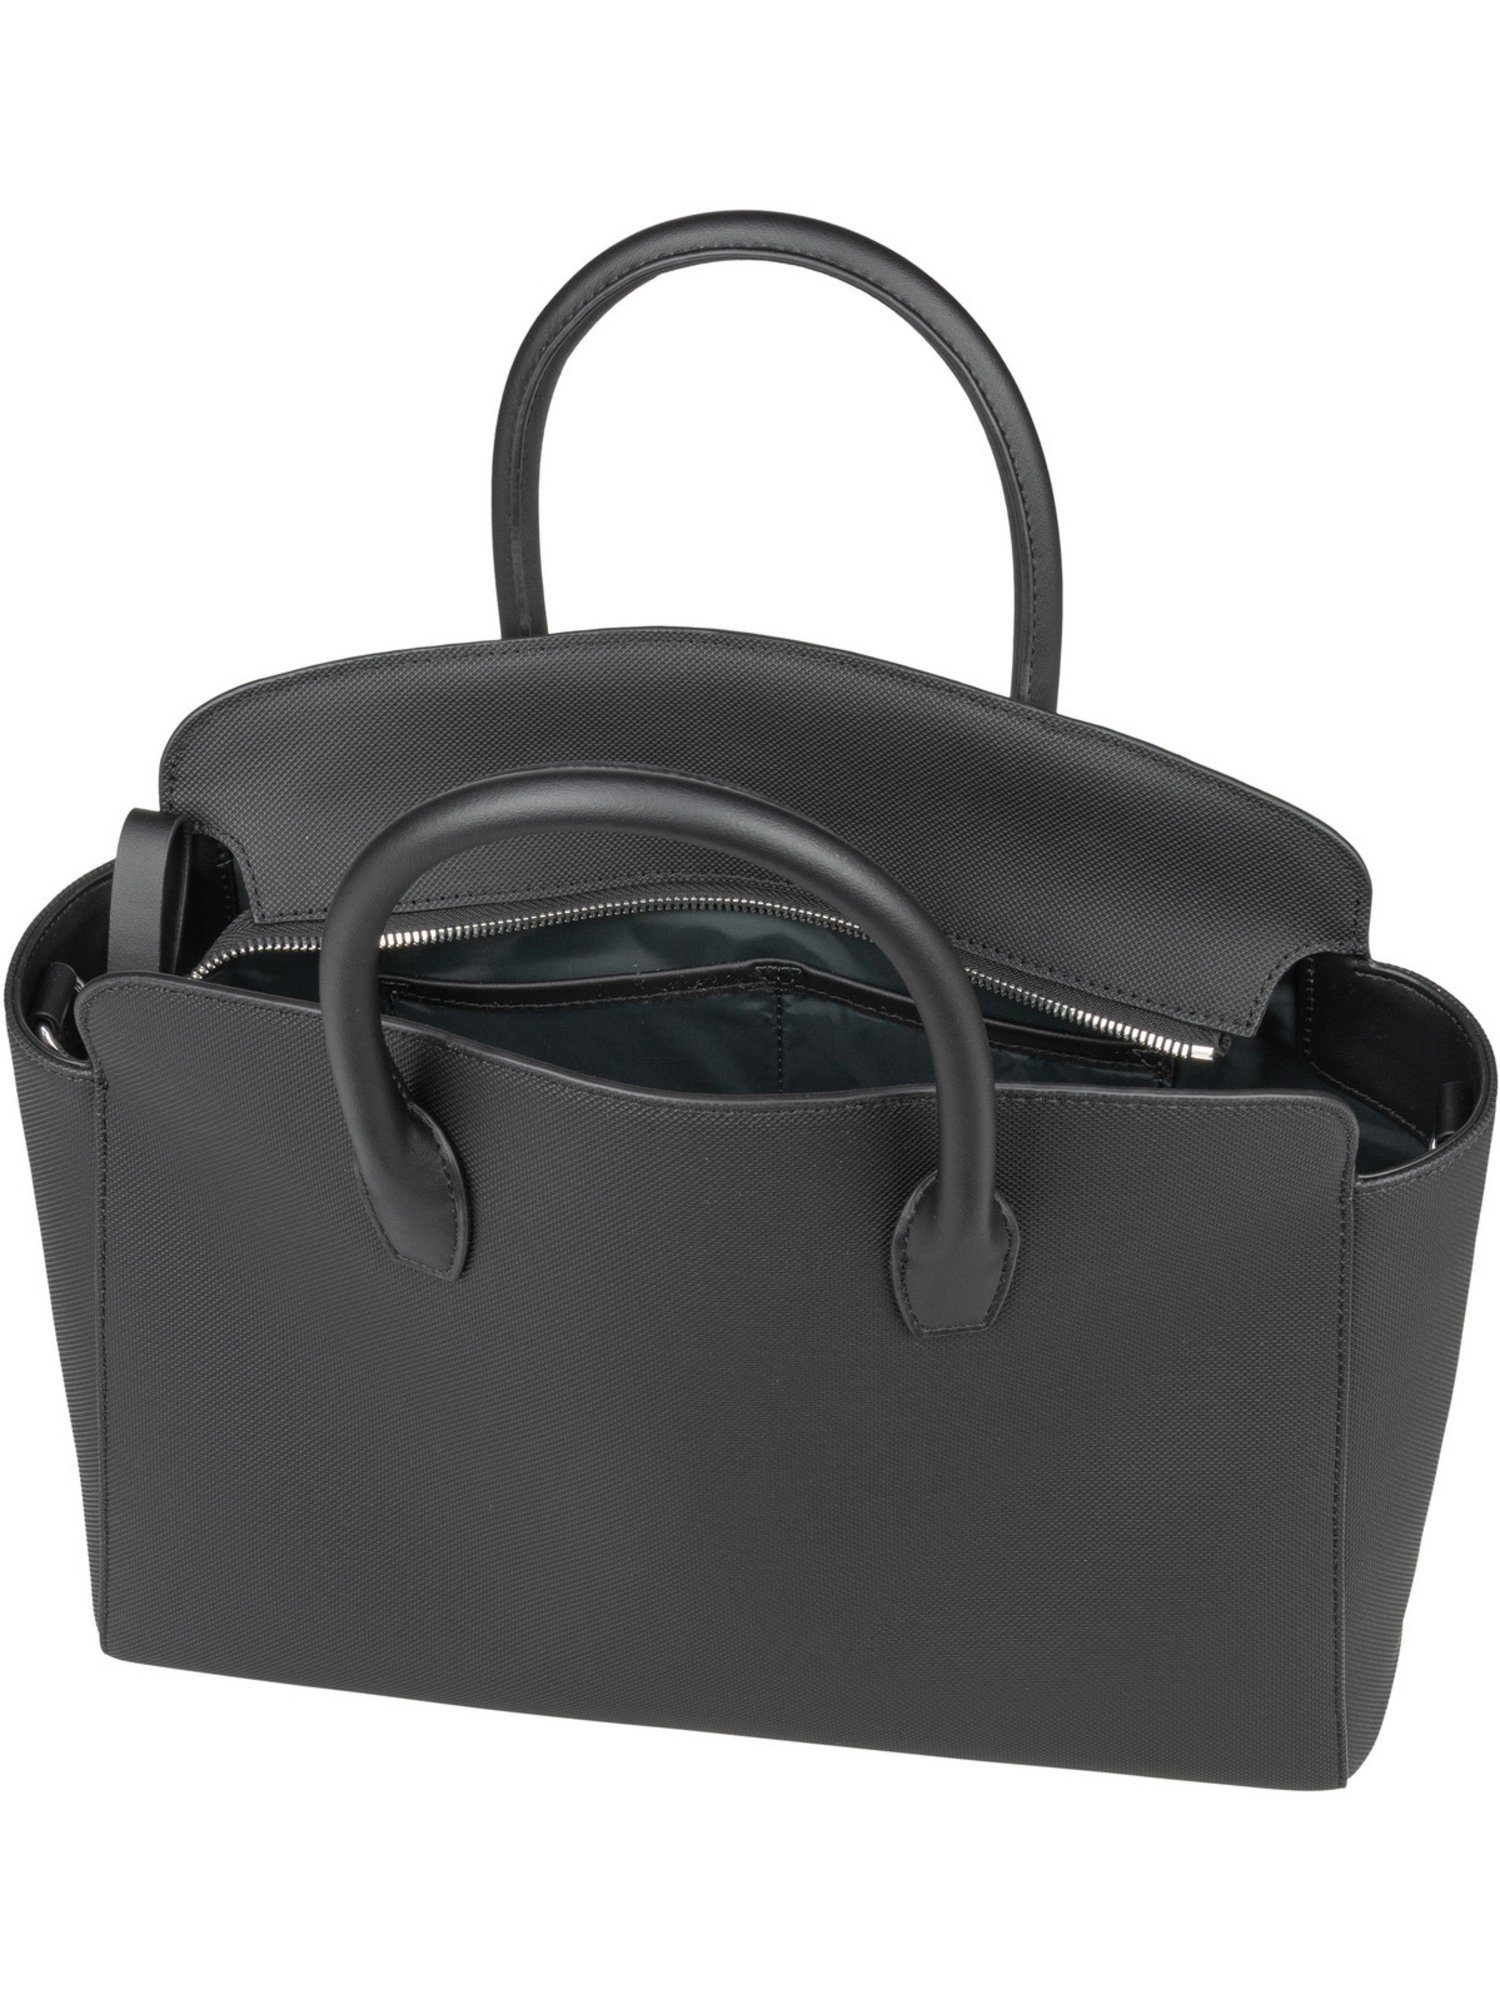 M Tote Handtasche Bag Top Bag Daily Handle 4092, Lacoste Lifestyle